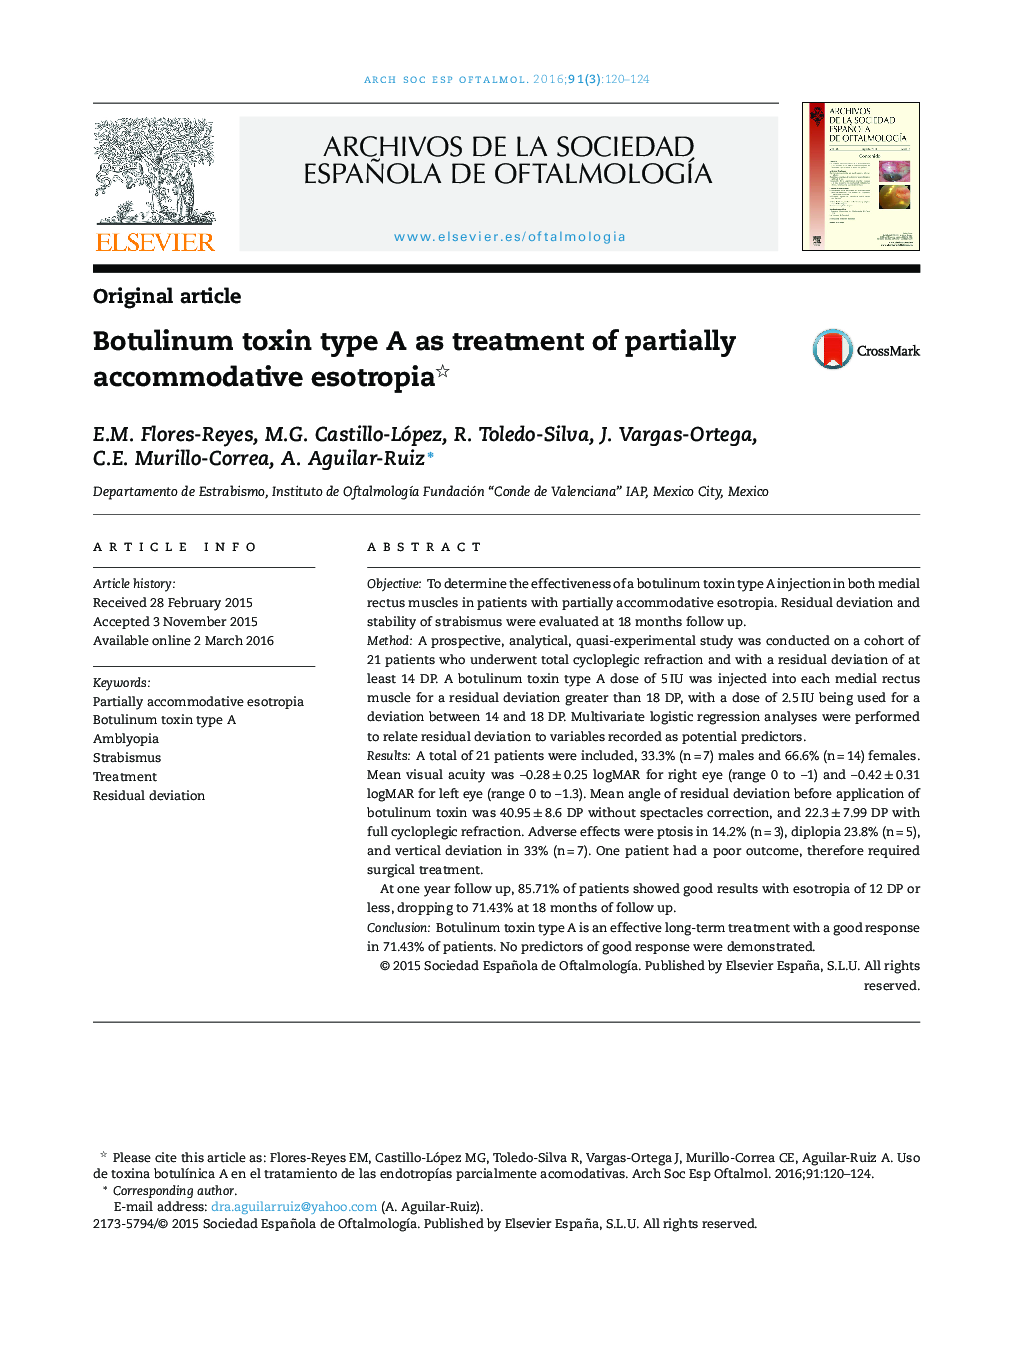 Botulinum toxin type A as treatment of partially accommodative esotropia 